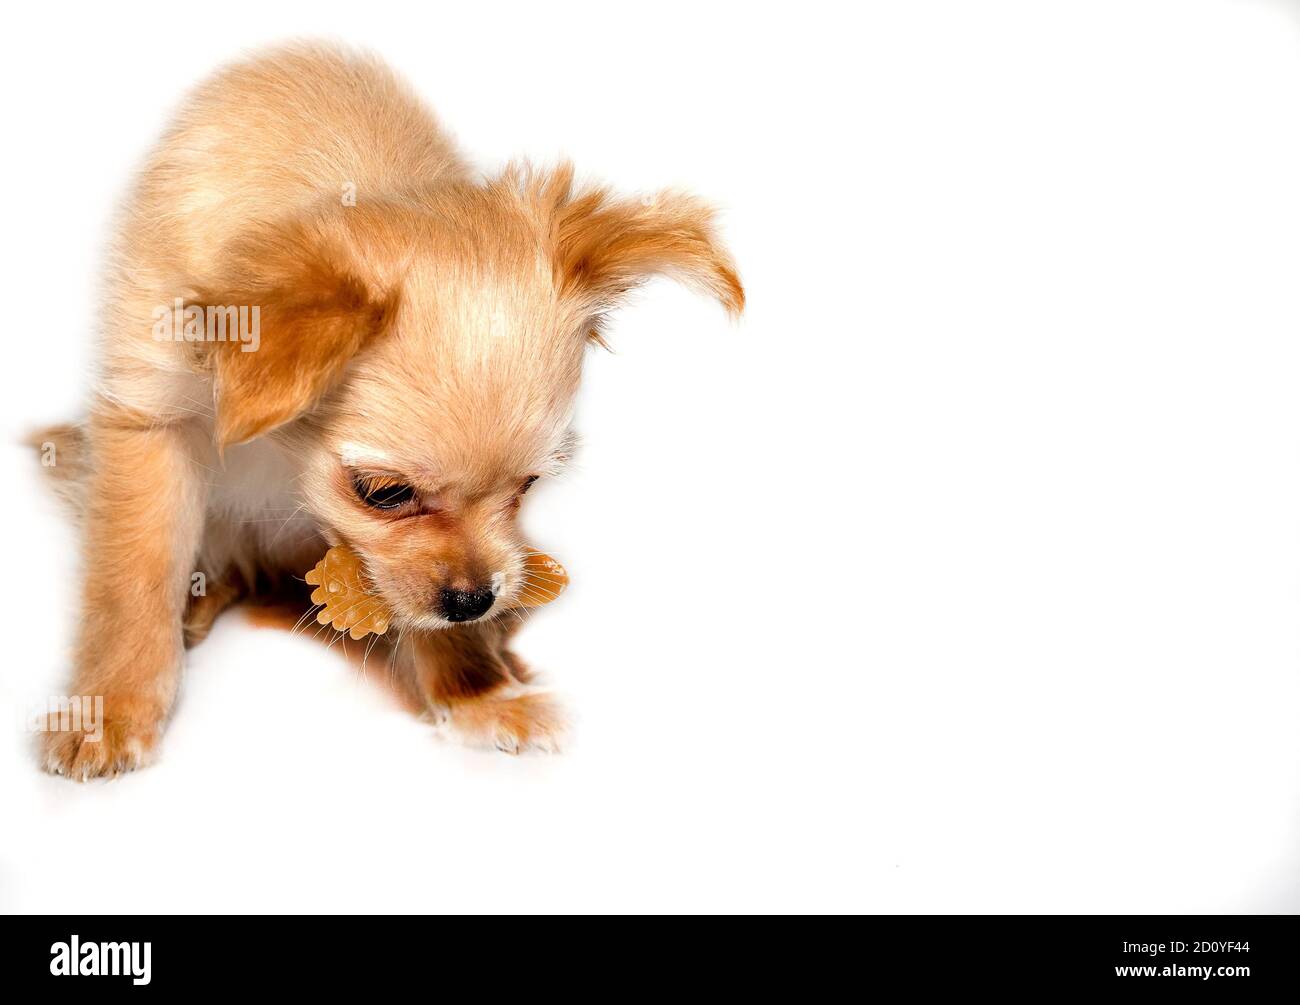 Puppy with a dog dental toys. Stock Photo